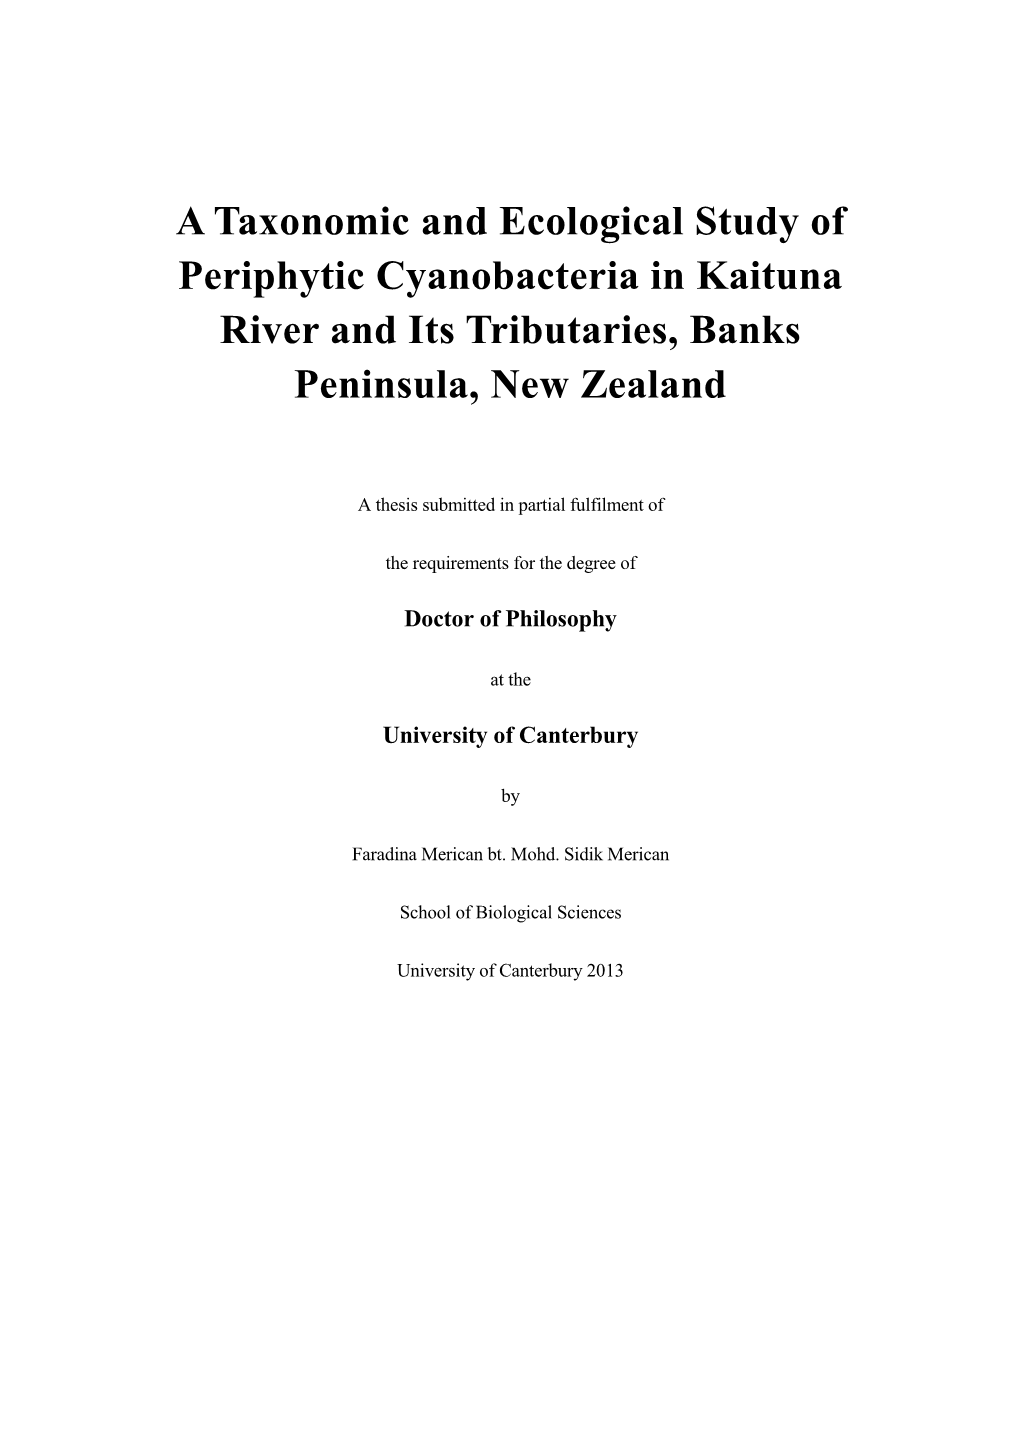 A Taxonomic and Ecological Study of Periphytic Cyanobacteria in Kaituna River and Its Tributaries, Banks Peninsula, New Zealand